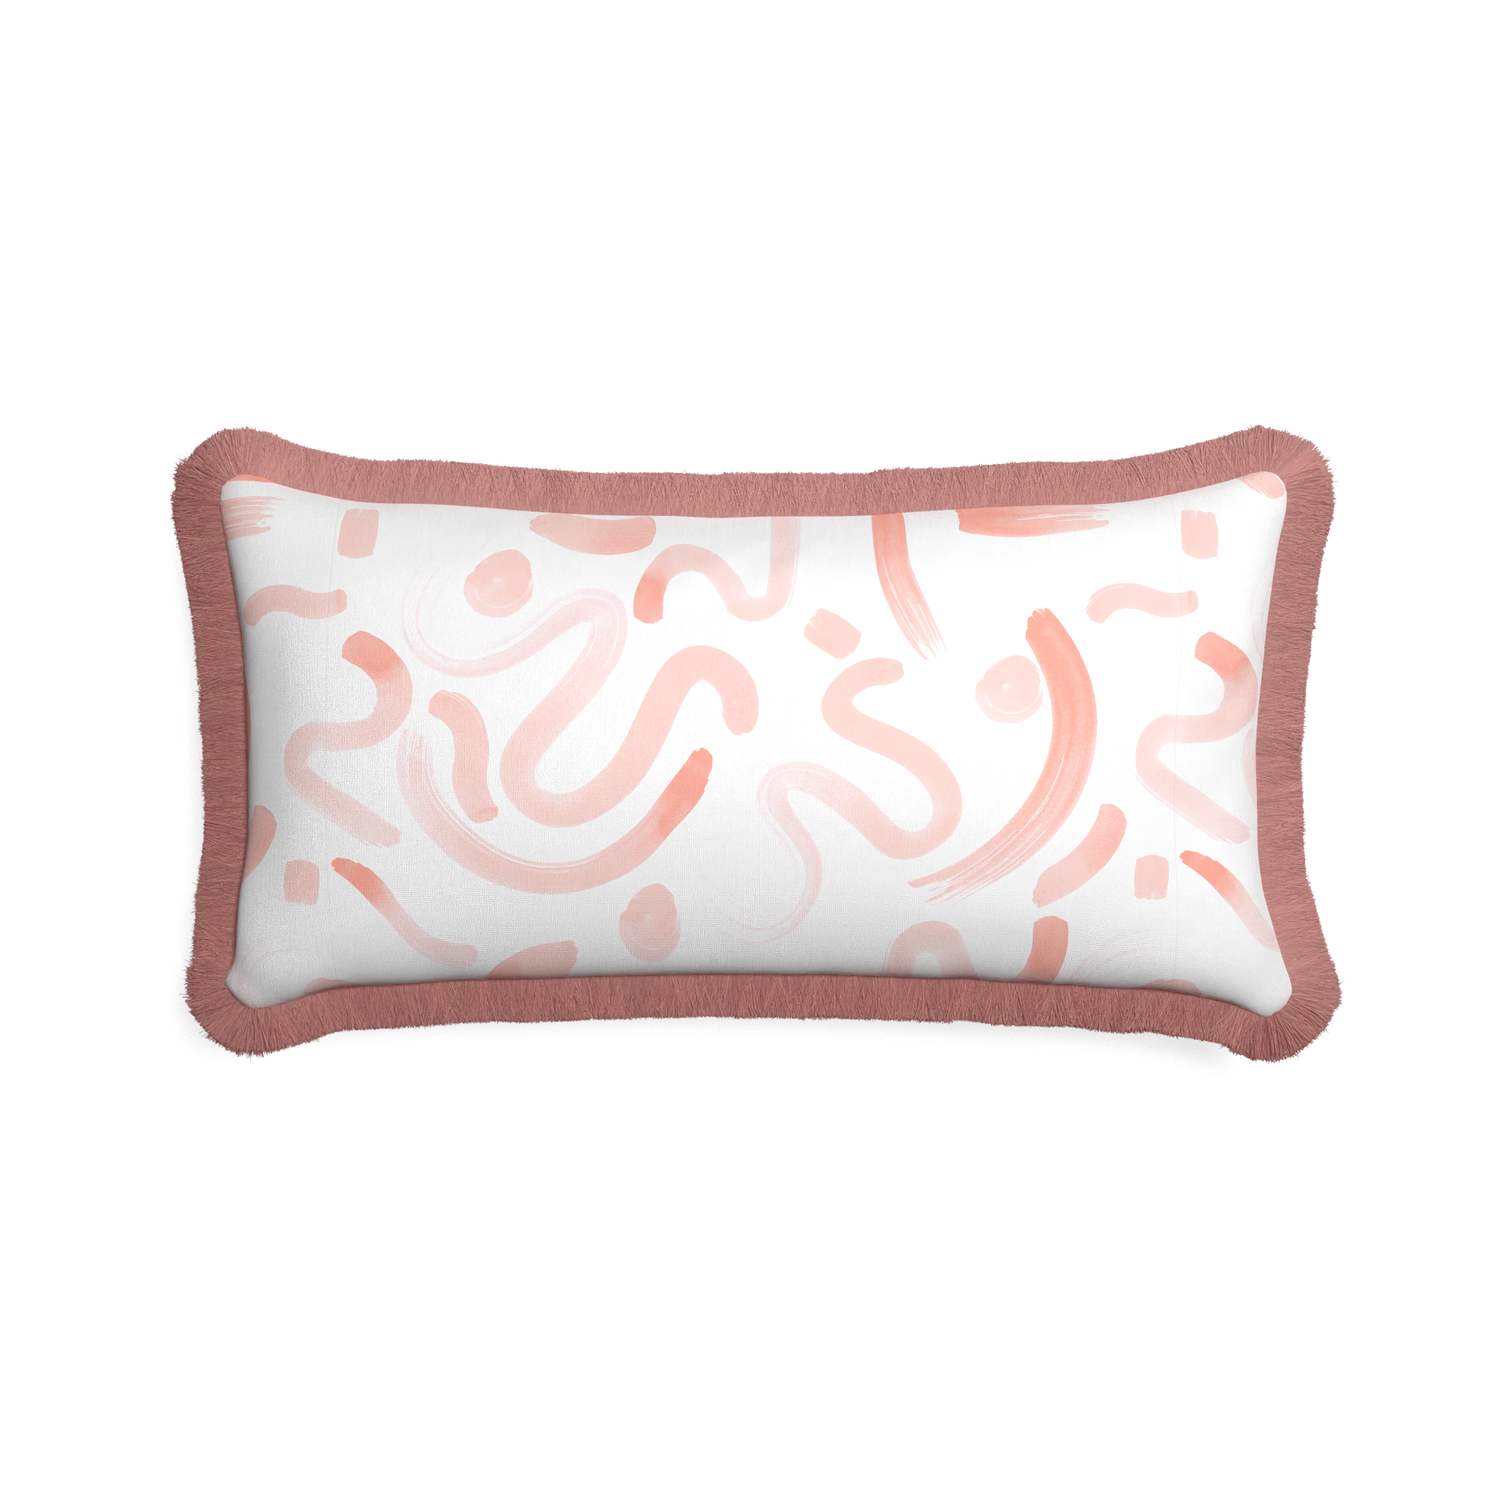 Midi-lumbar hockney pink custom pink graphicpillow with d fringe on white background